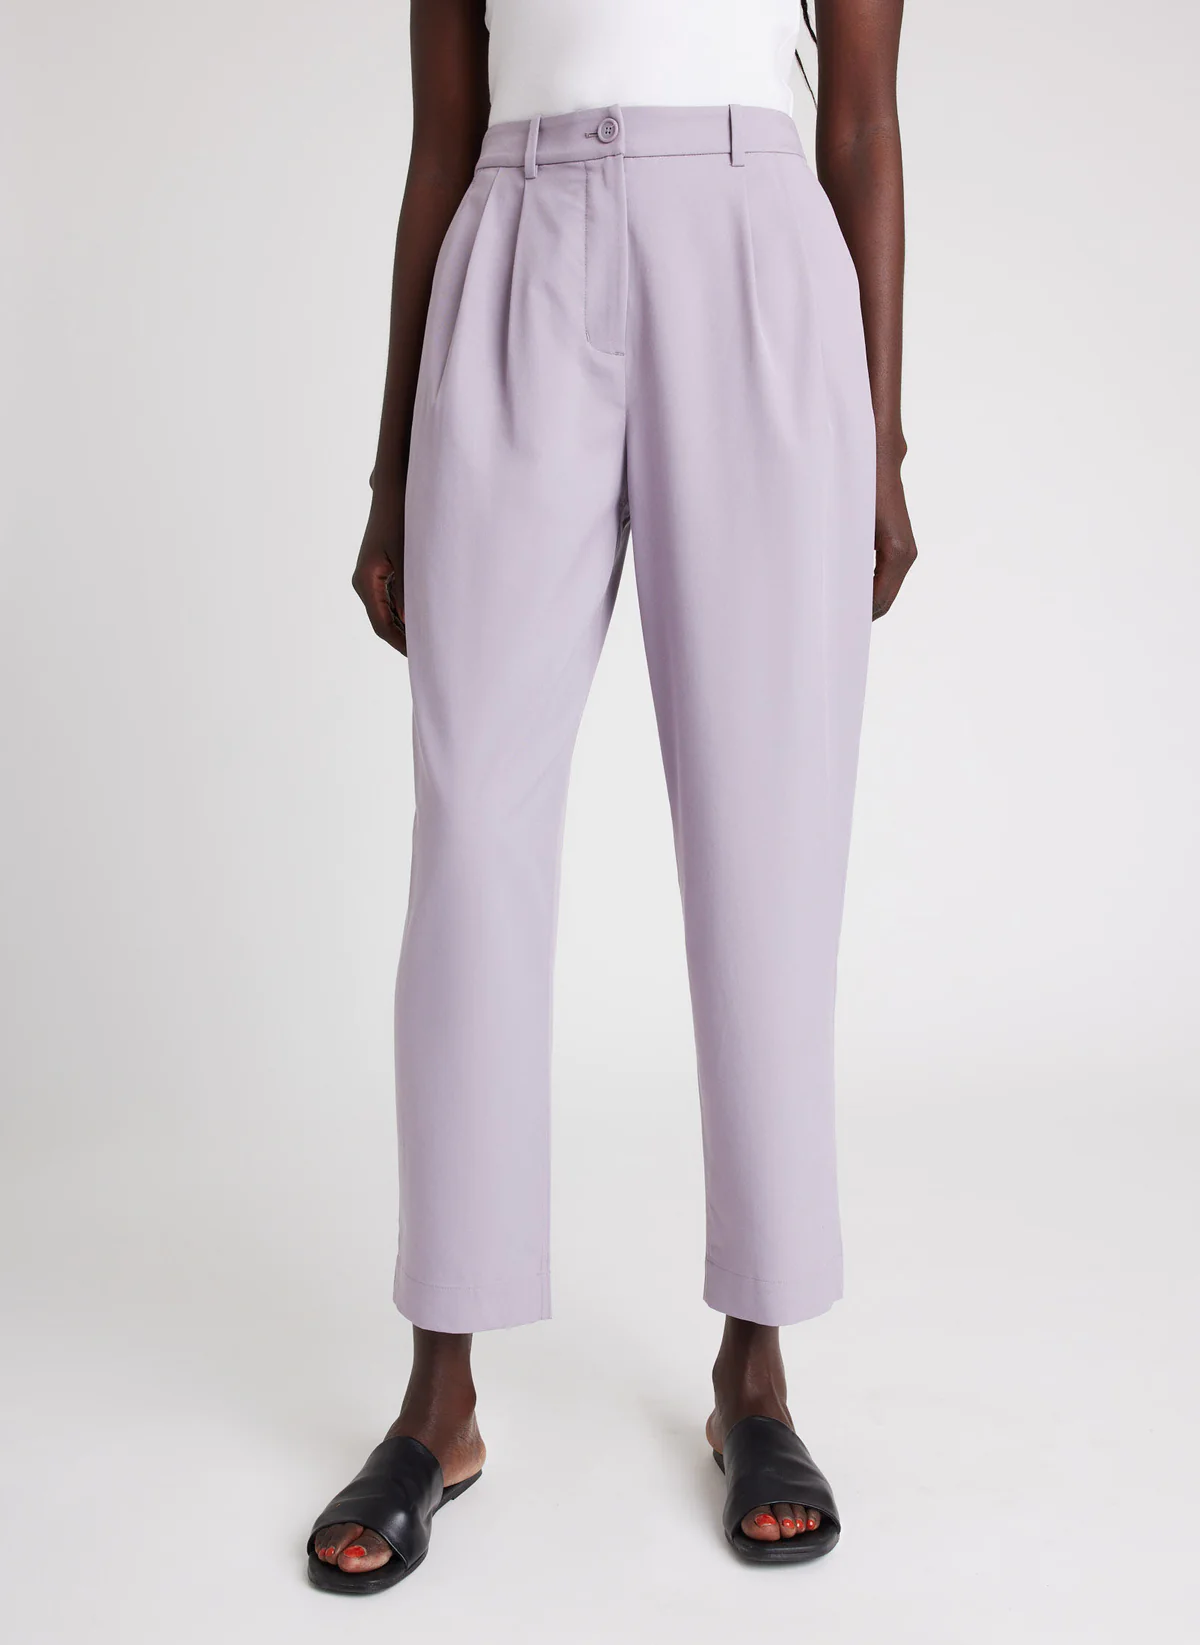 Kit and Ace + Sublime Ankle Trousers